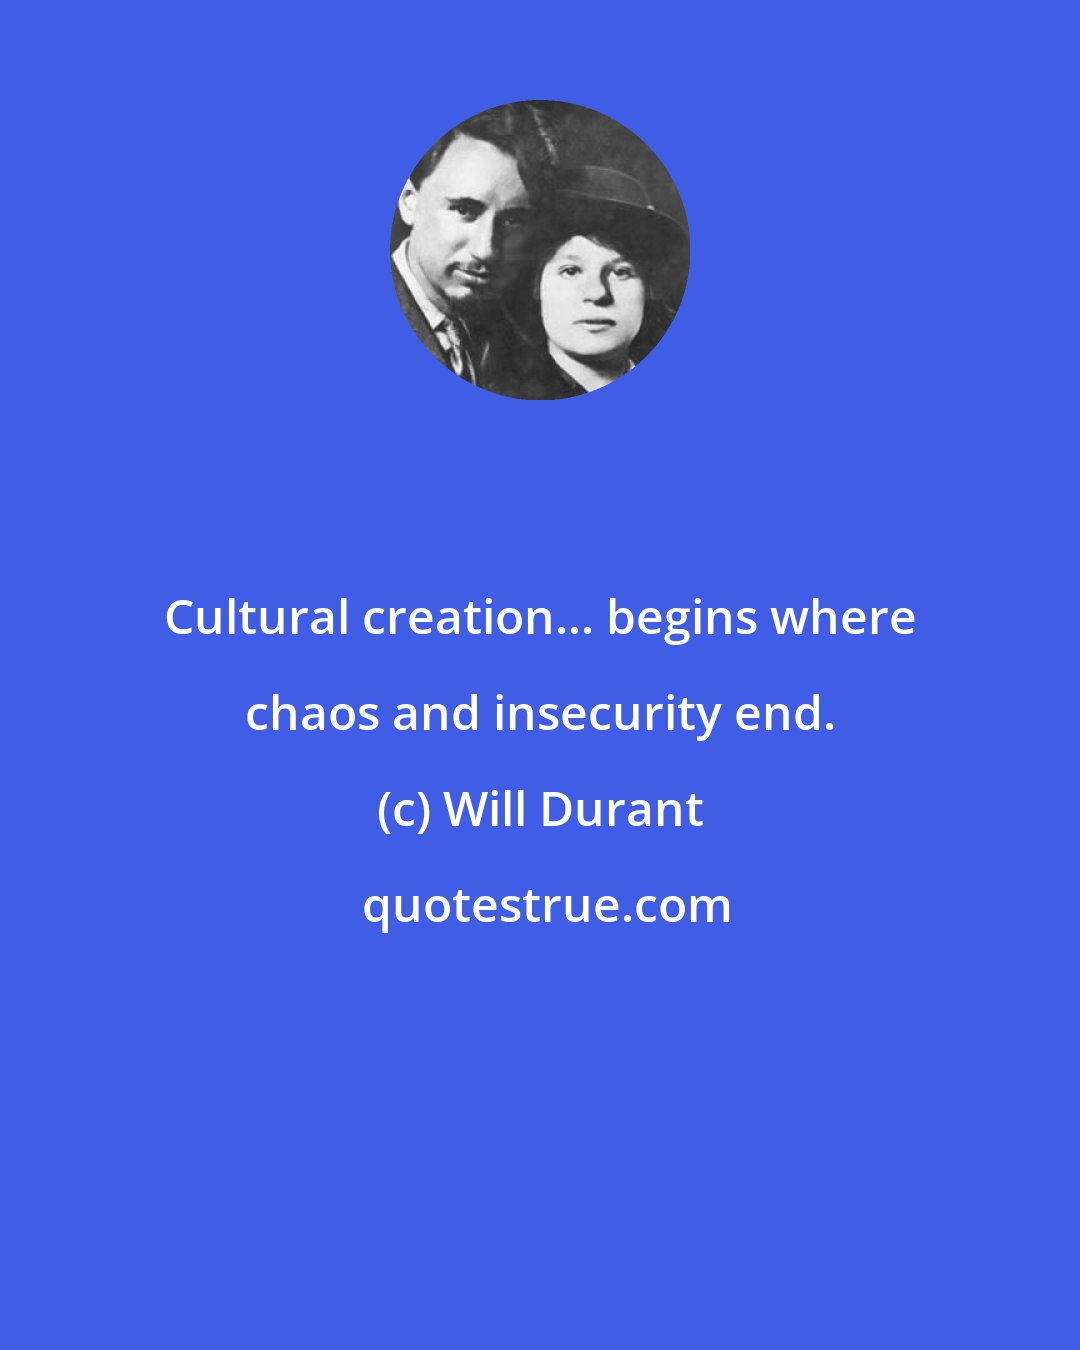 Will Durant: Cultural creation... begins where chaos and insecurity end.